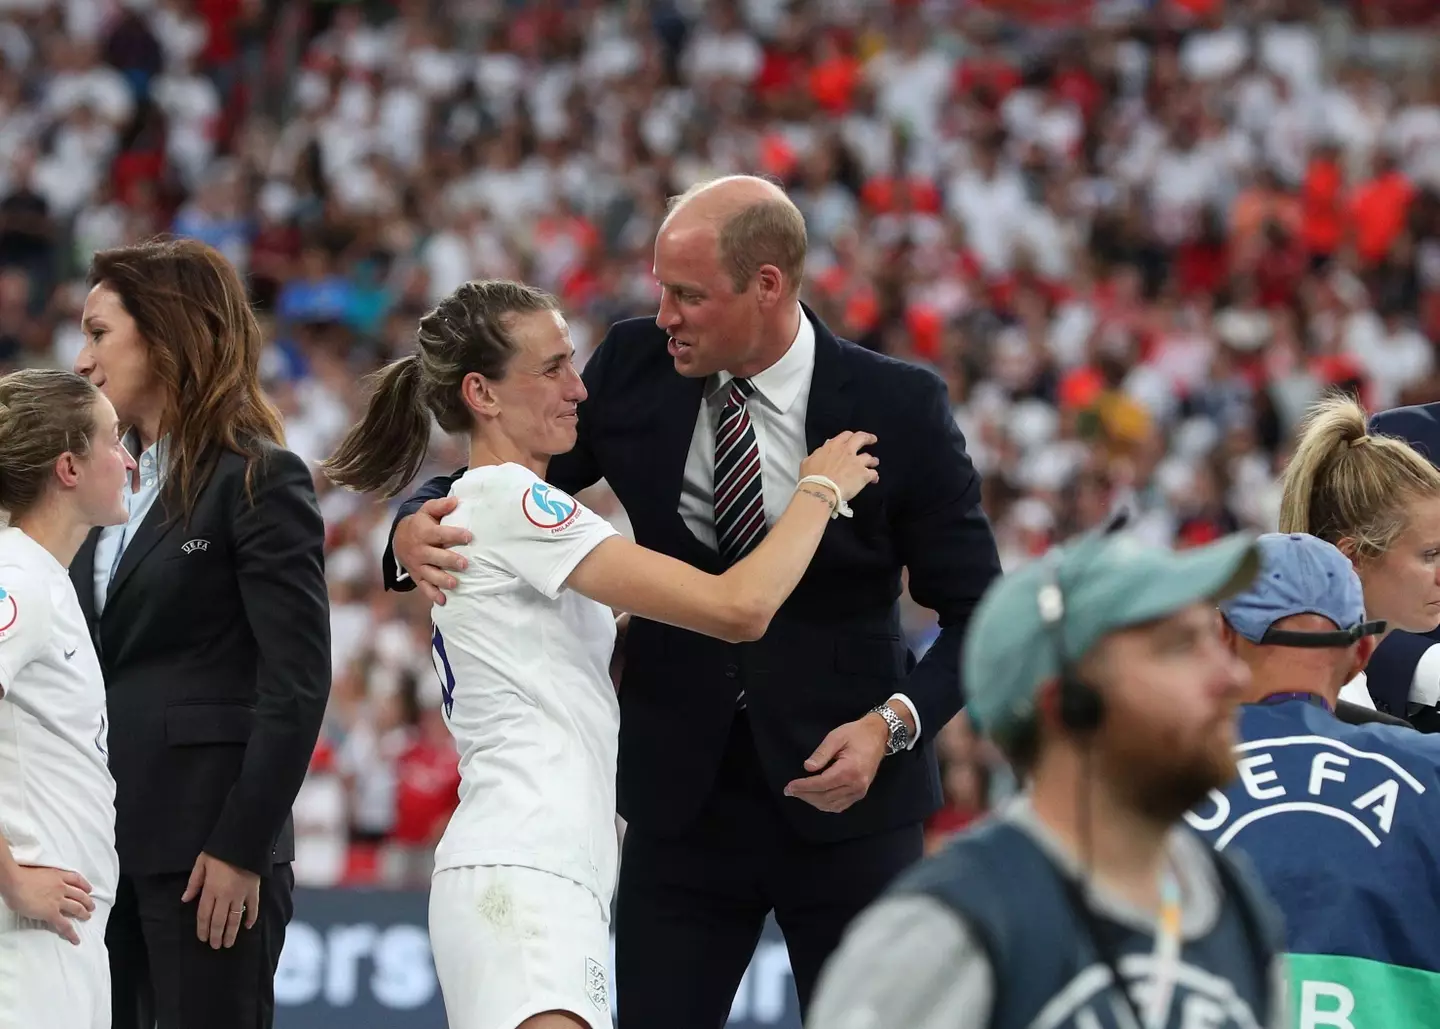 Jill Scott and Prince William celebrated the historic win on the pitch.